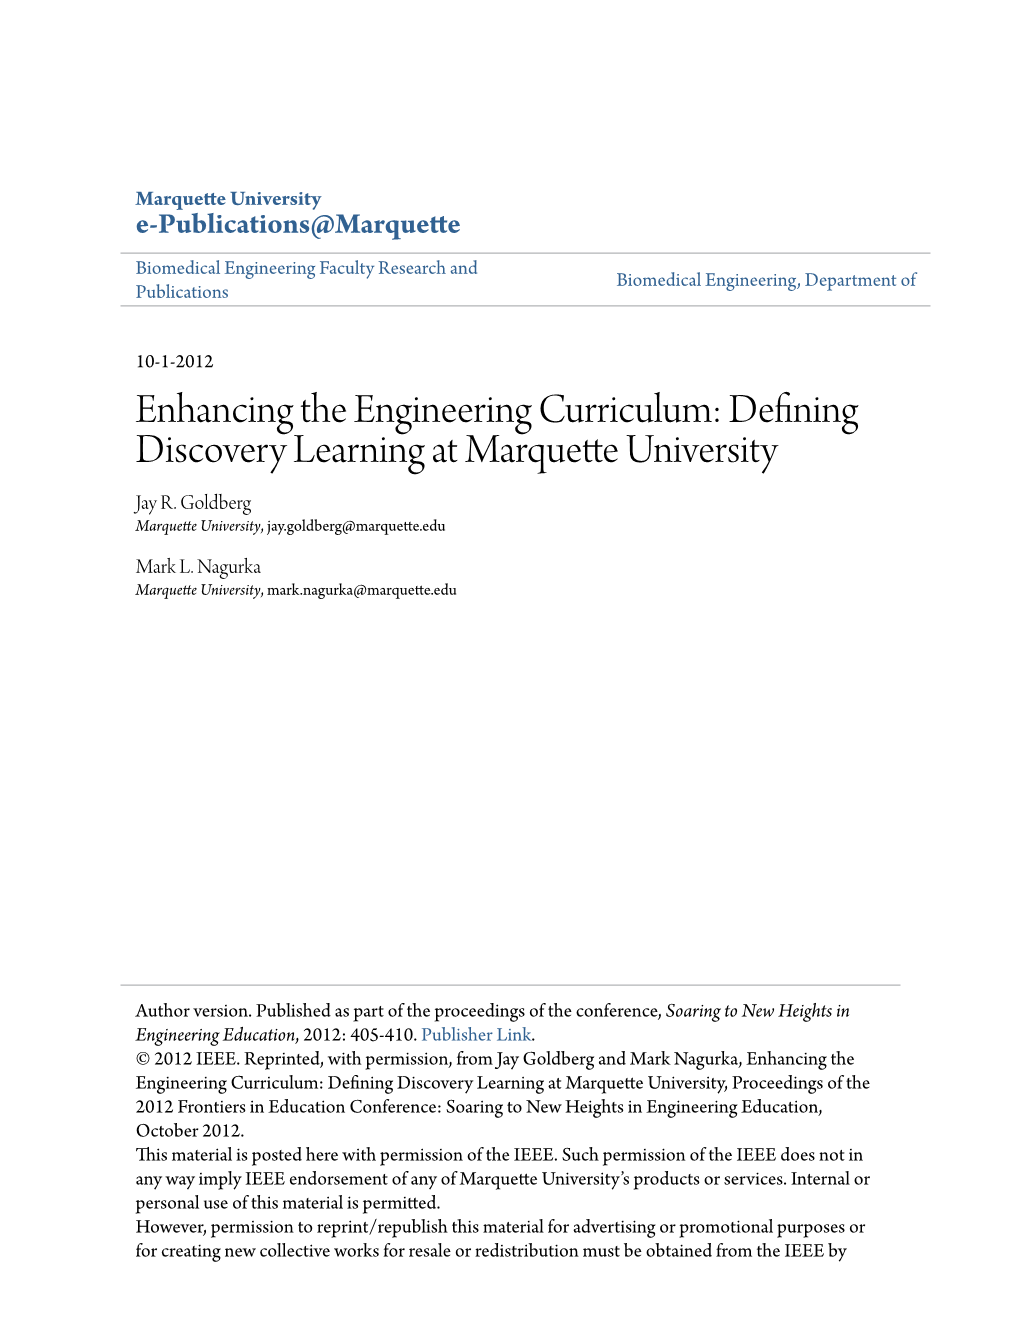 Enhancing the Engineering Curriculum: Defining Discovery Learning at Marquette University Jay R